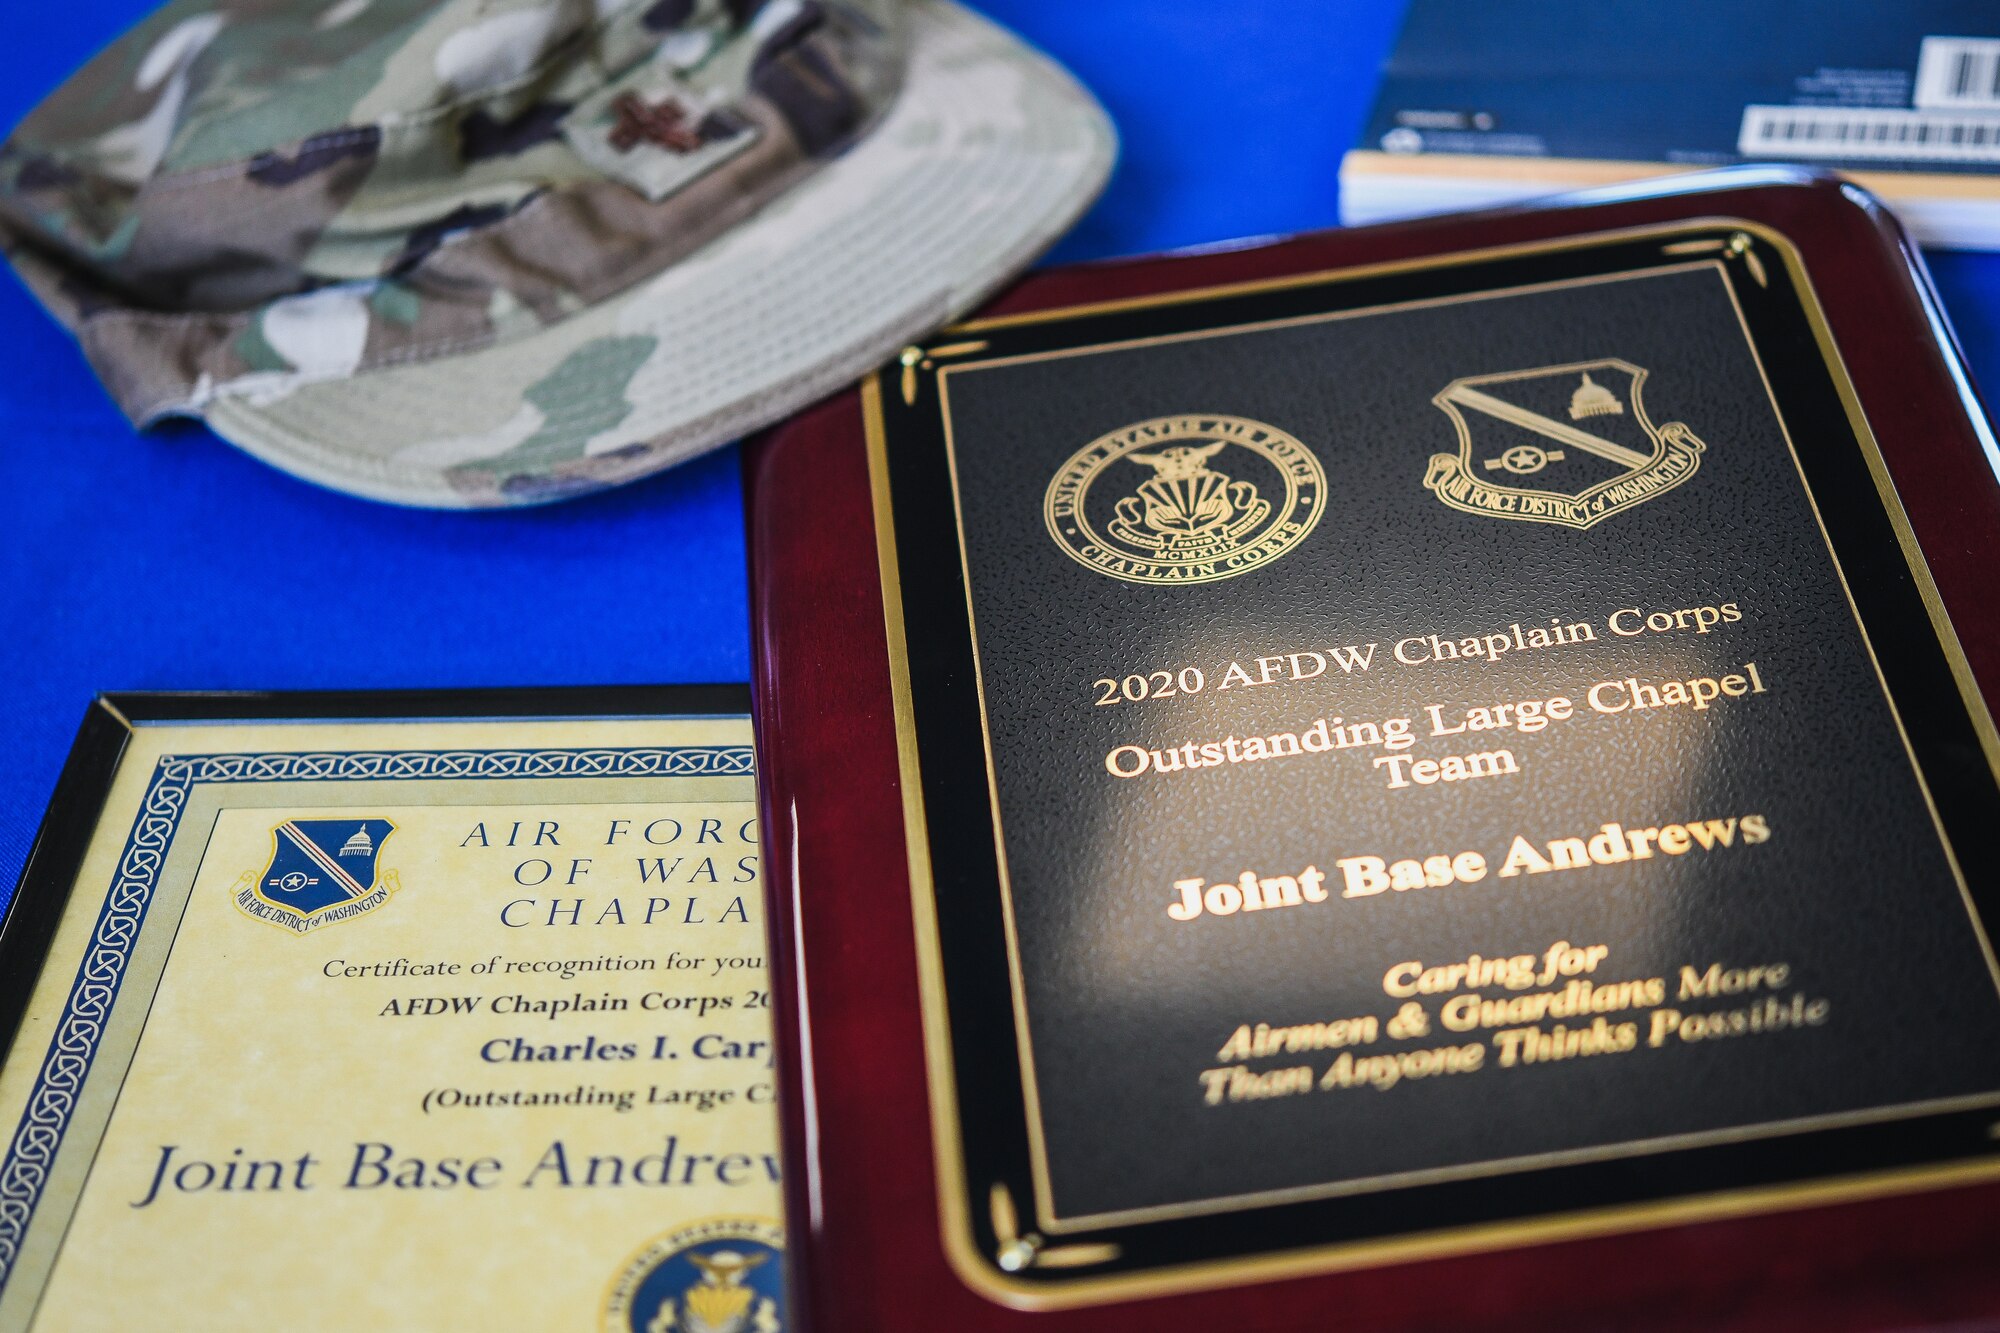 A Charles R. Meier Award and an Outstanding Large Chapel Team Award sit on the table during the 2020 Annual Awards Presentation at Chapel 1, Joint Base Andrews, Md., May 18, 2021. (U.S. Air Force photo by Airman 1st Class Bridgitte Taylor)